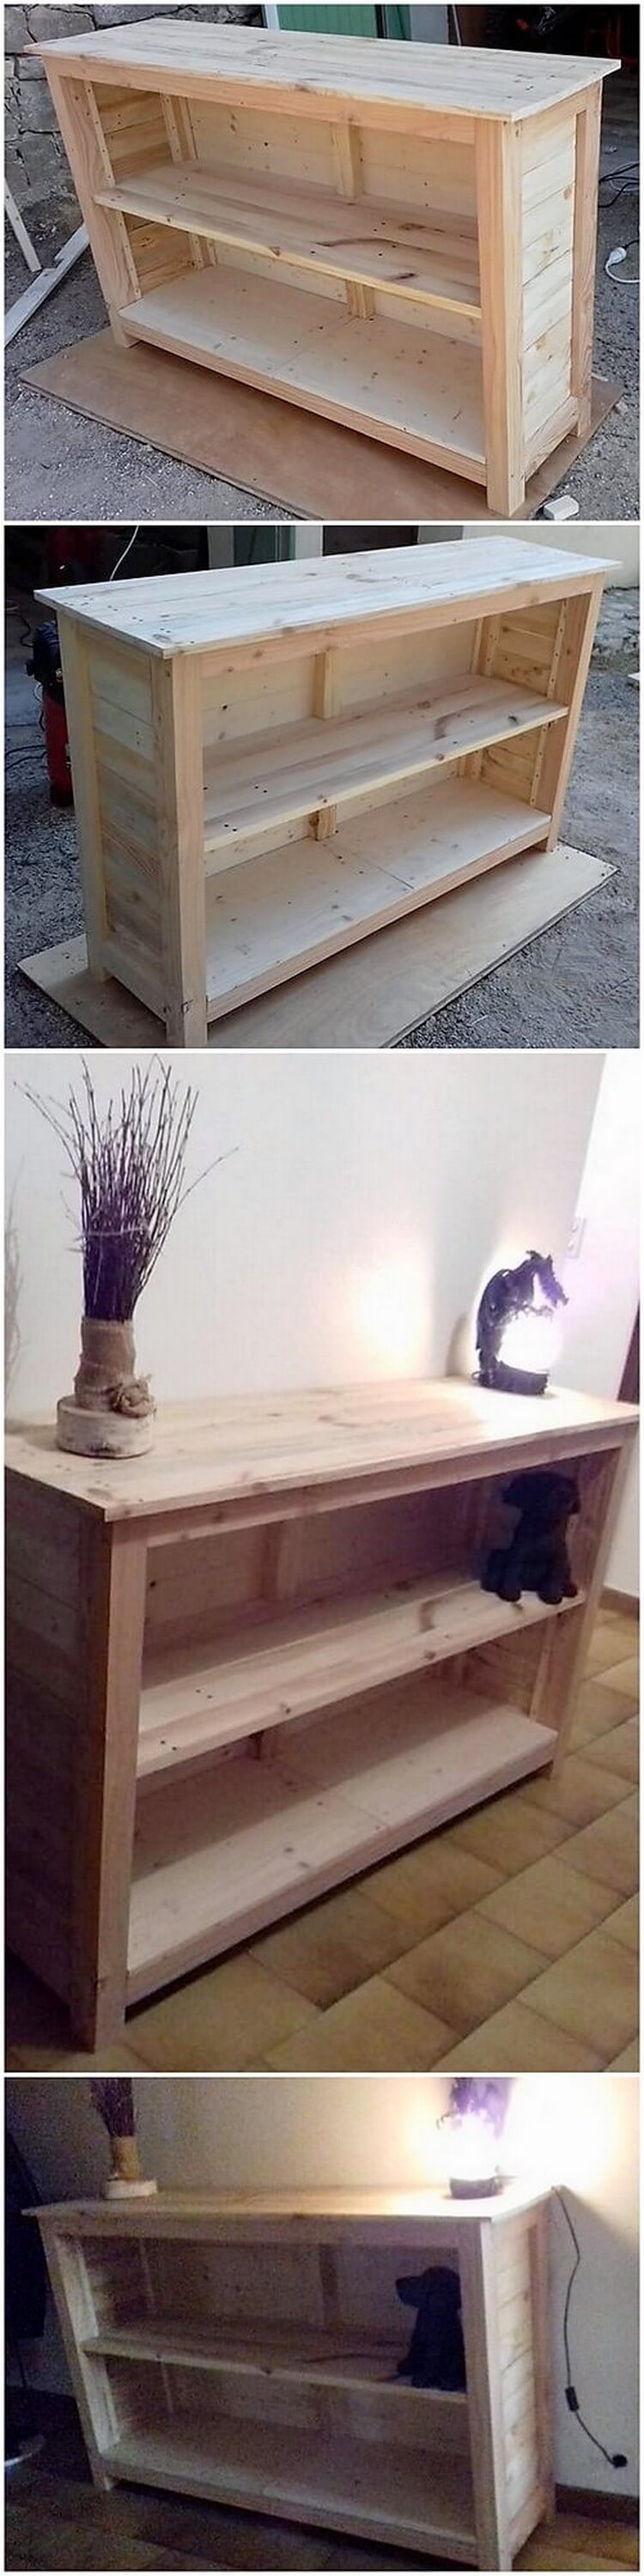 Wooden Pallet Shelving Table